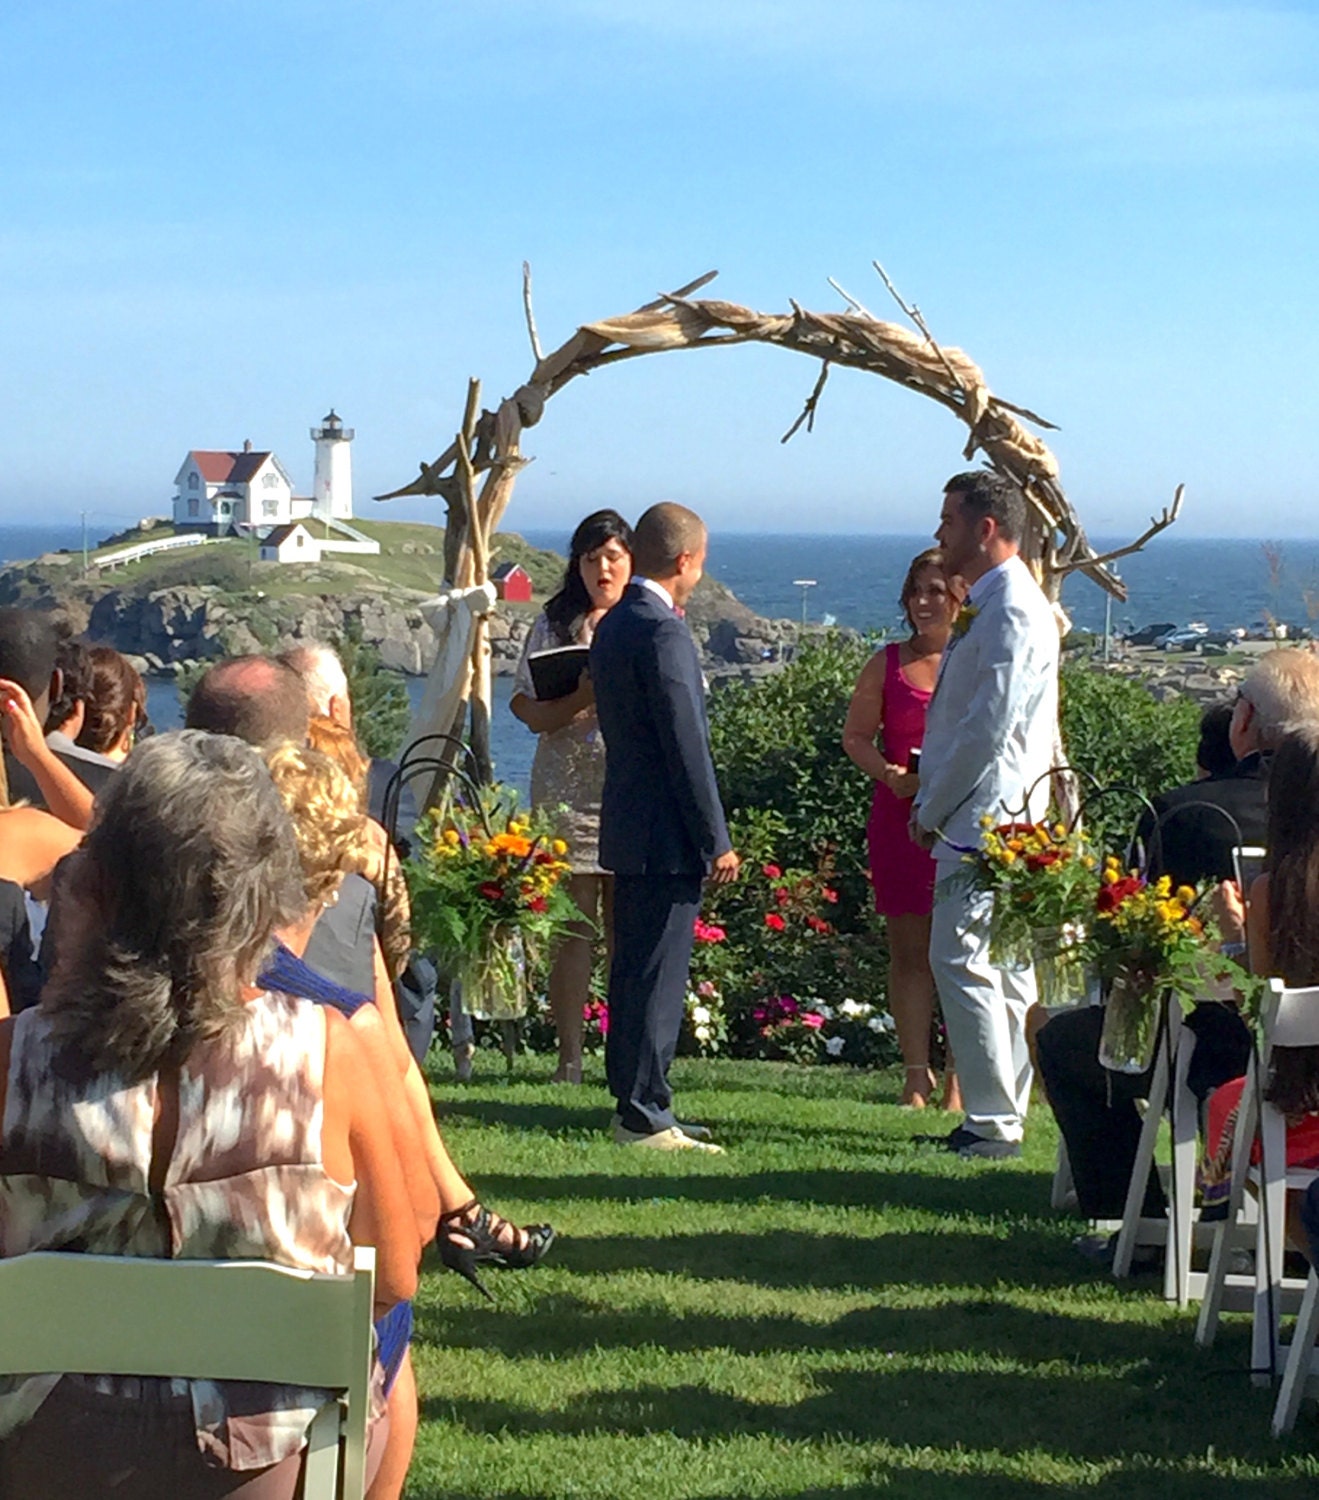 Wedding Arch made from Maine Driftwood - Curved Self-Standing Design - Delivery to ME, NH, MA